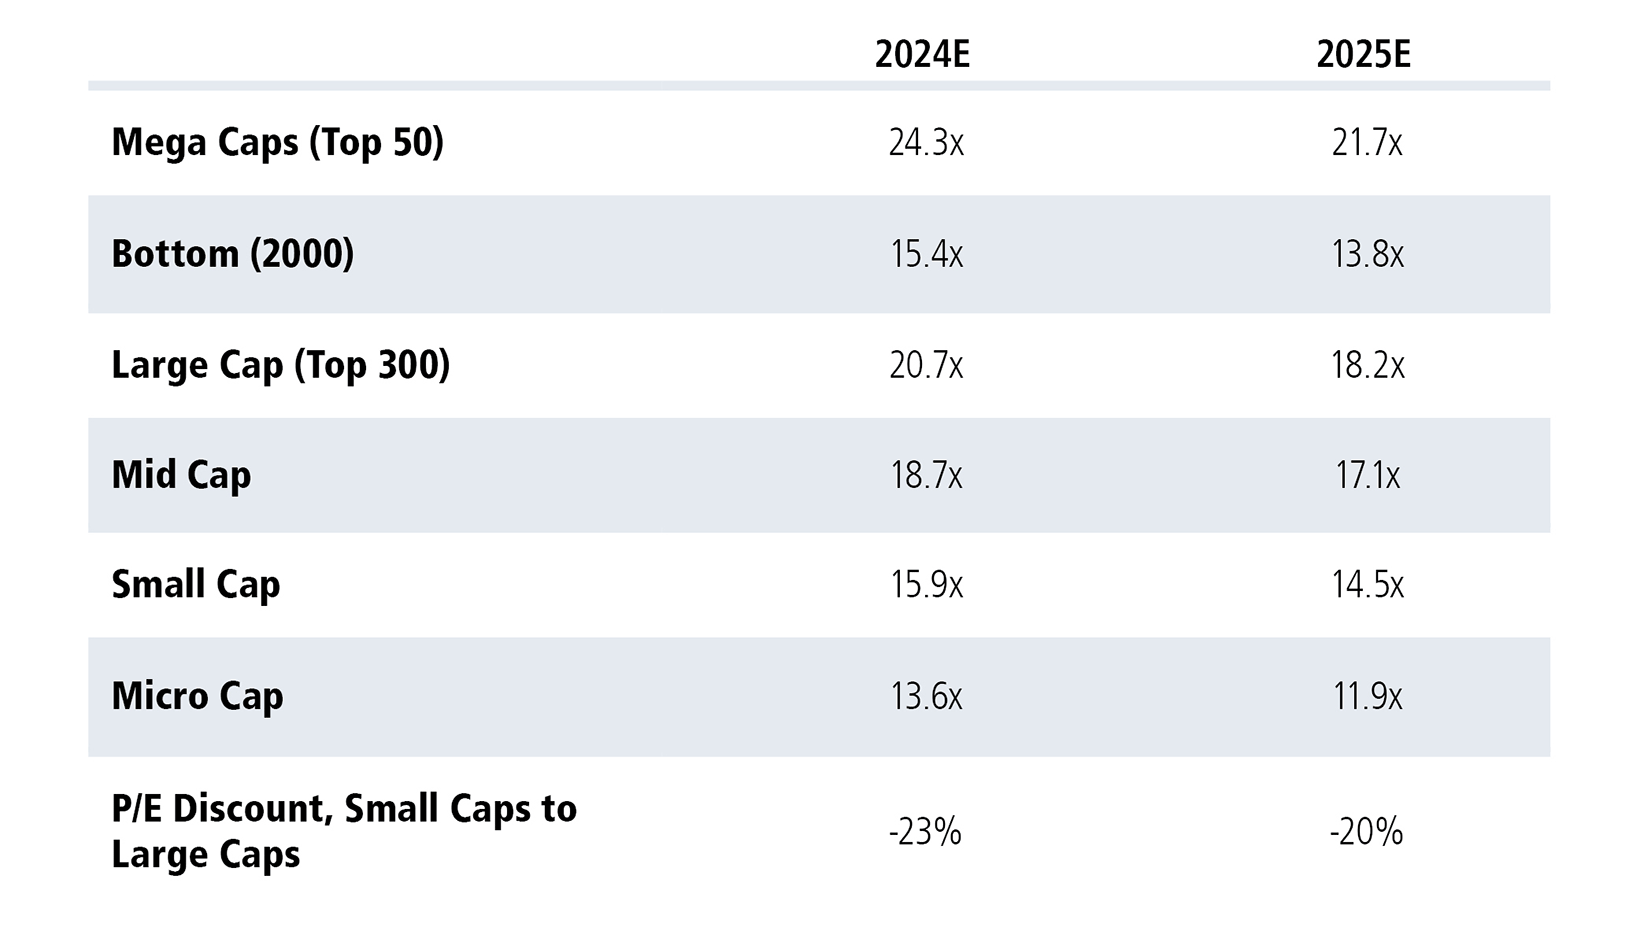 valuations for 2024E and 2025E